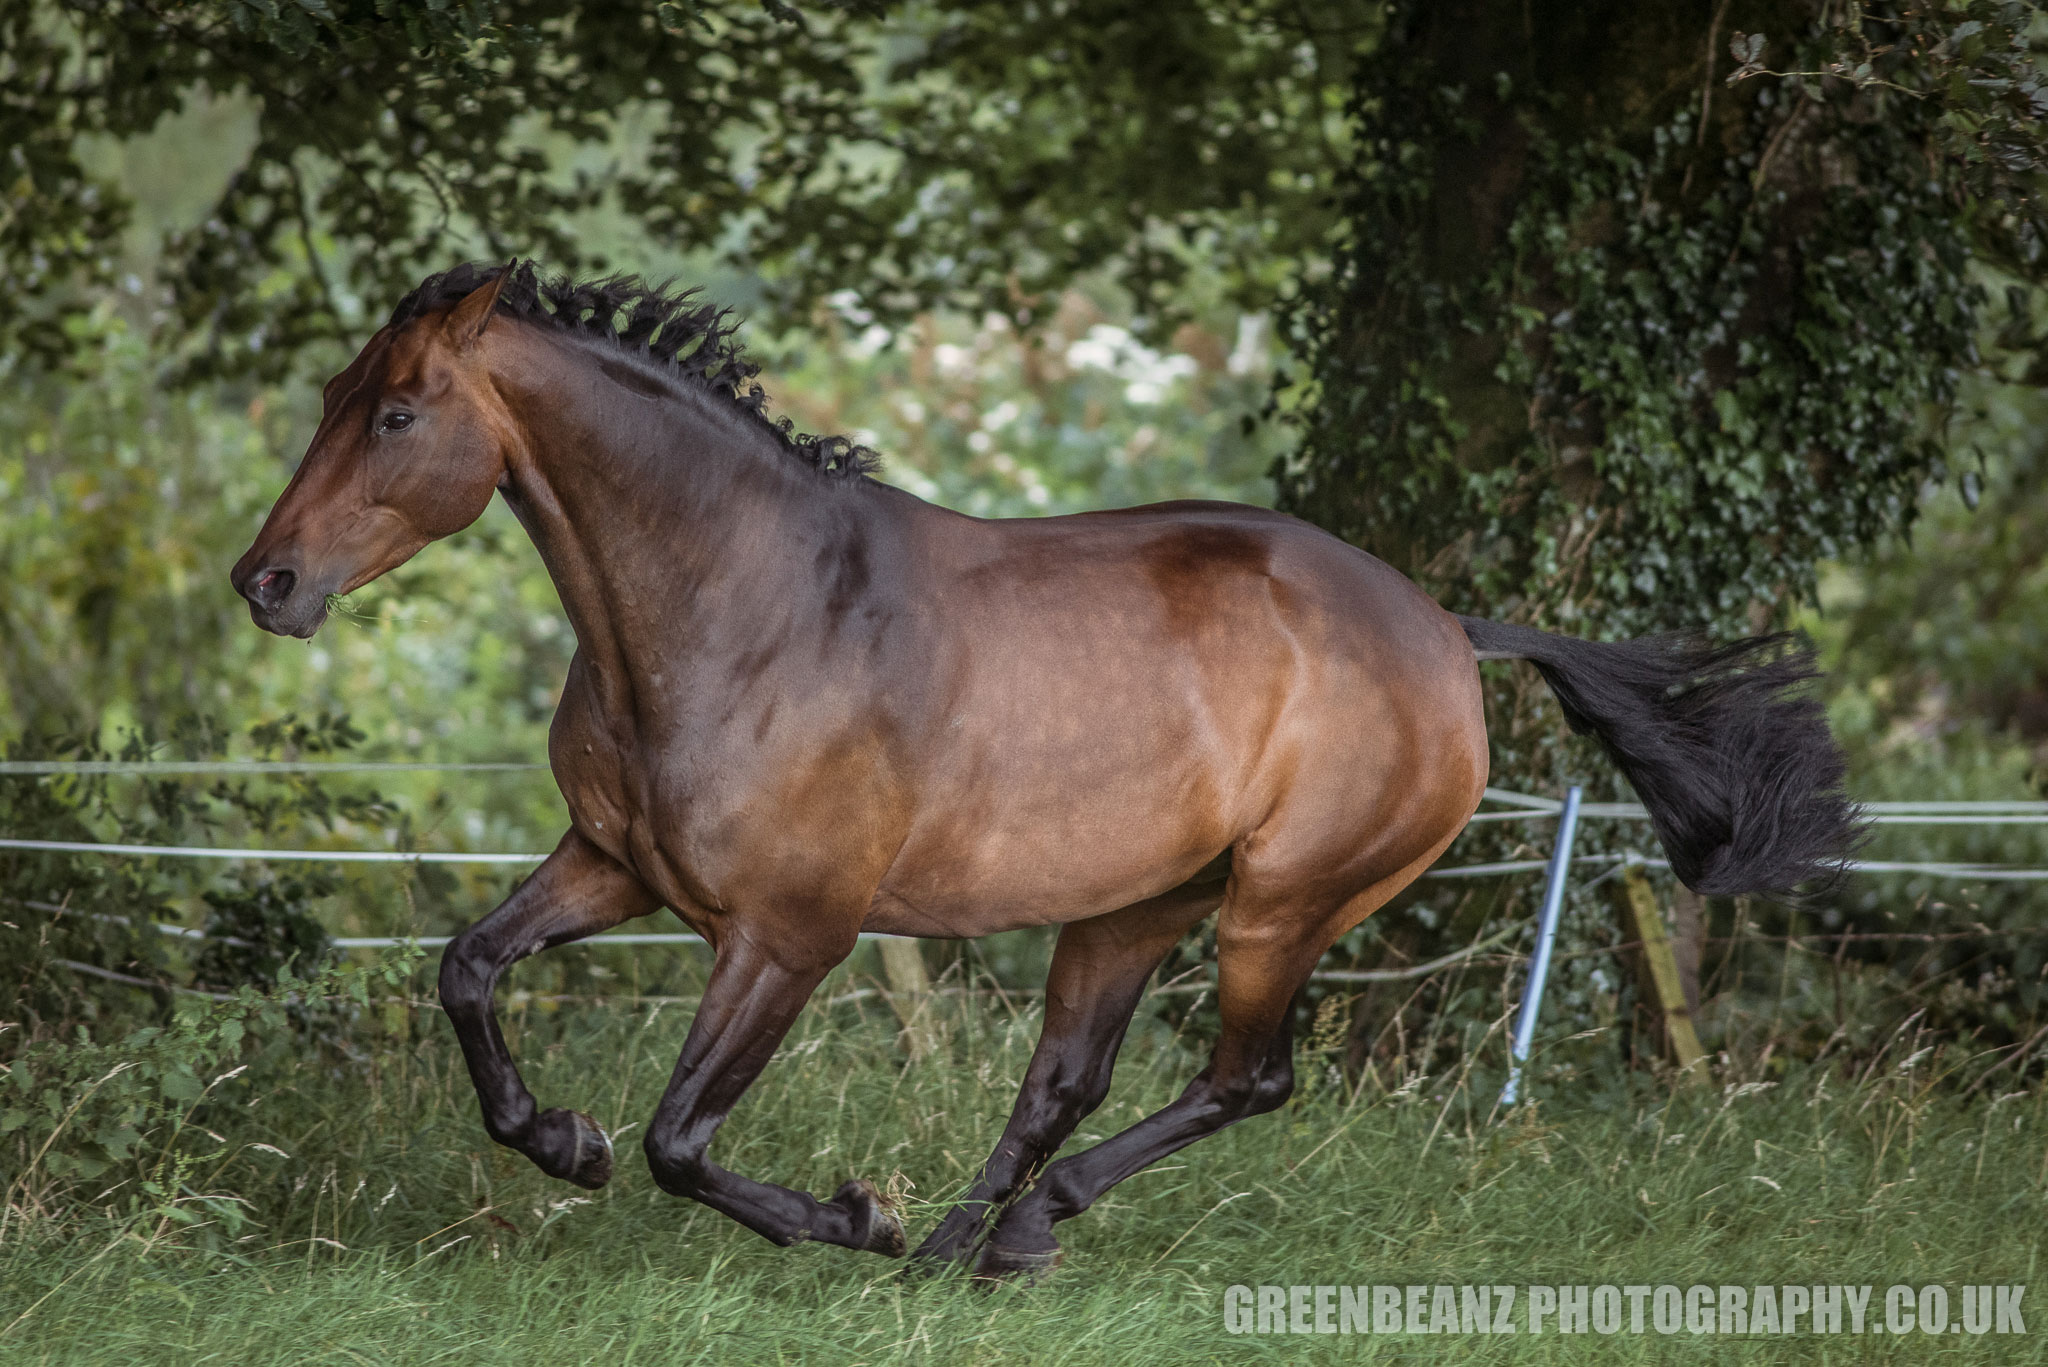 Photograph of Horse in motion UK Horse Photography